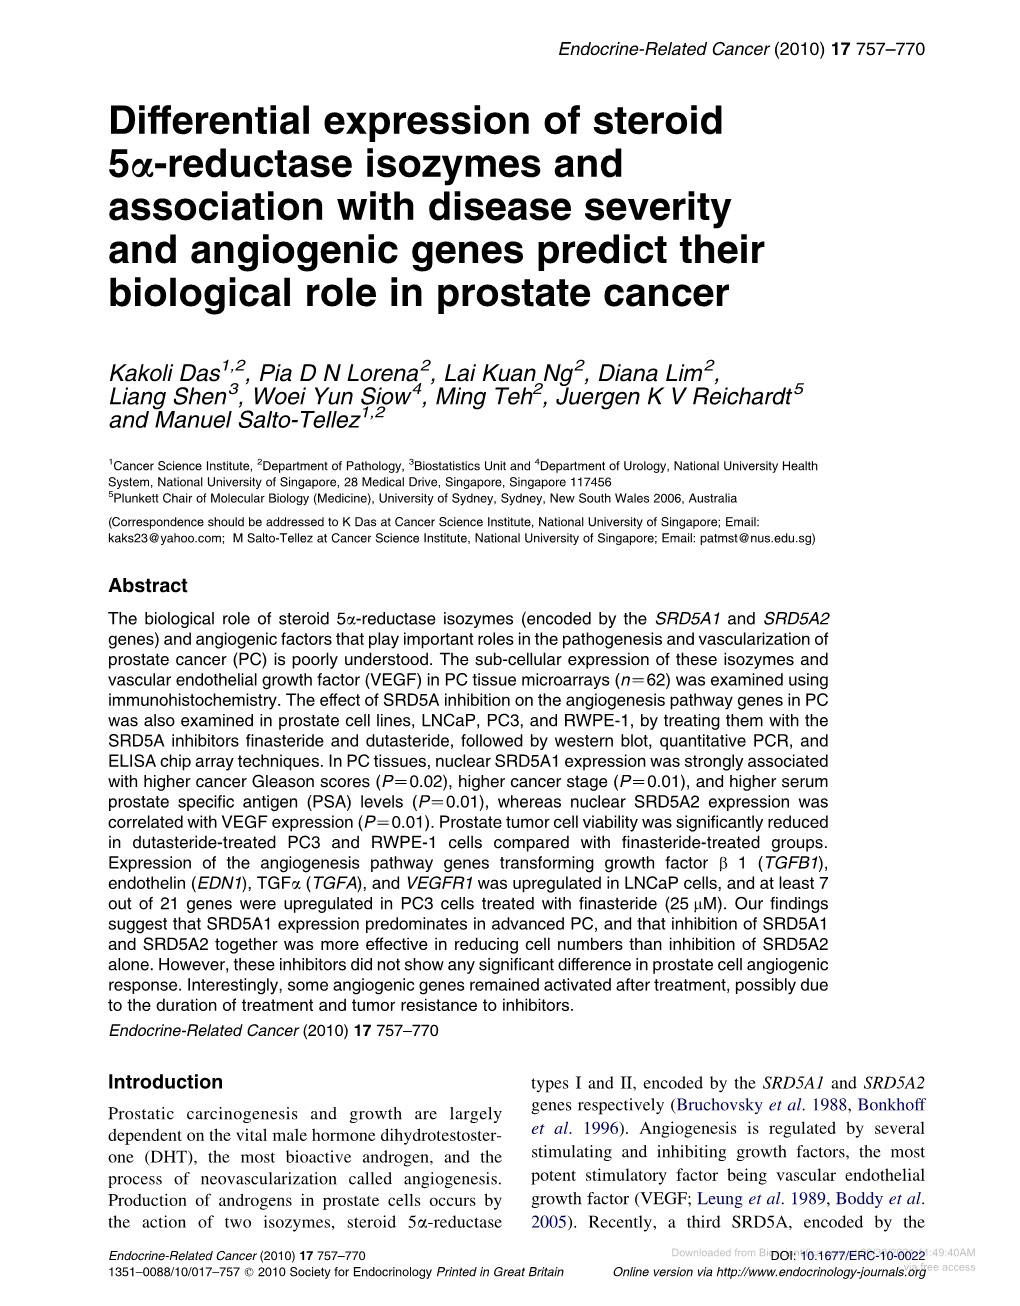 Differential Expression of Steroid 5A-Reductase Isozymes and Association with Disease Severity and Angiogenic Genes Predict Their Biological Role in Prostate Cancer